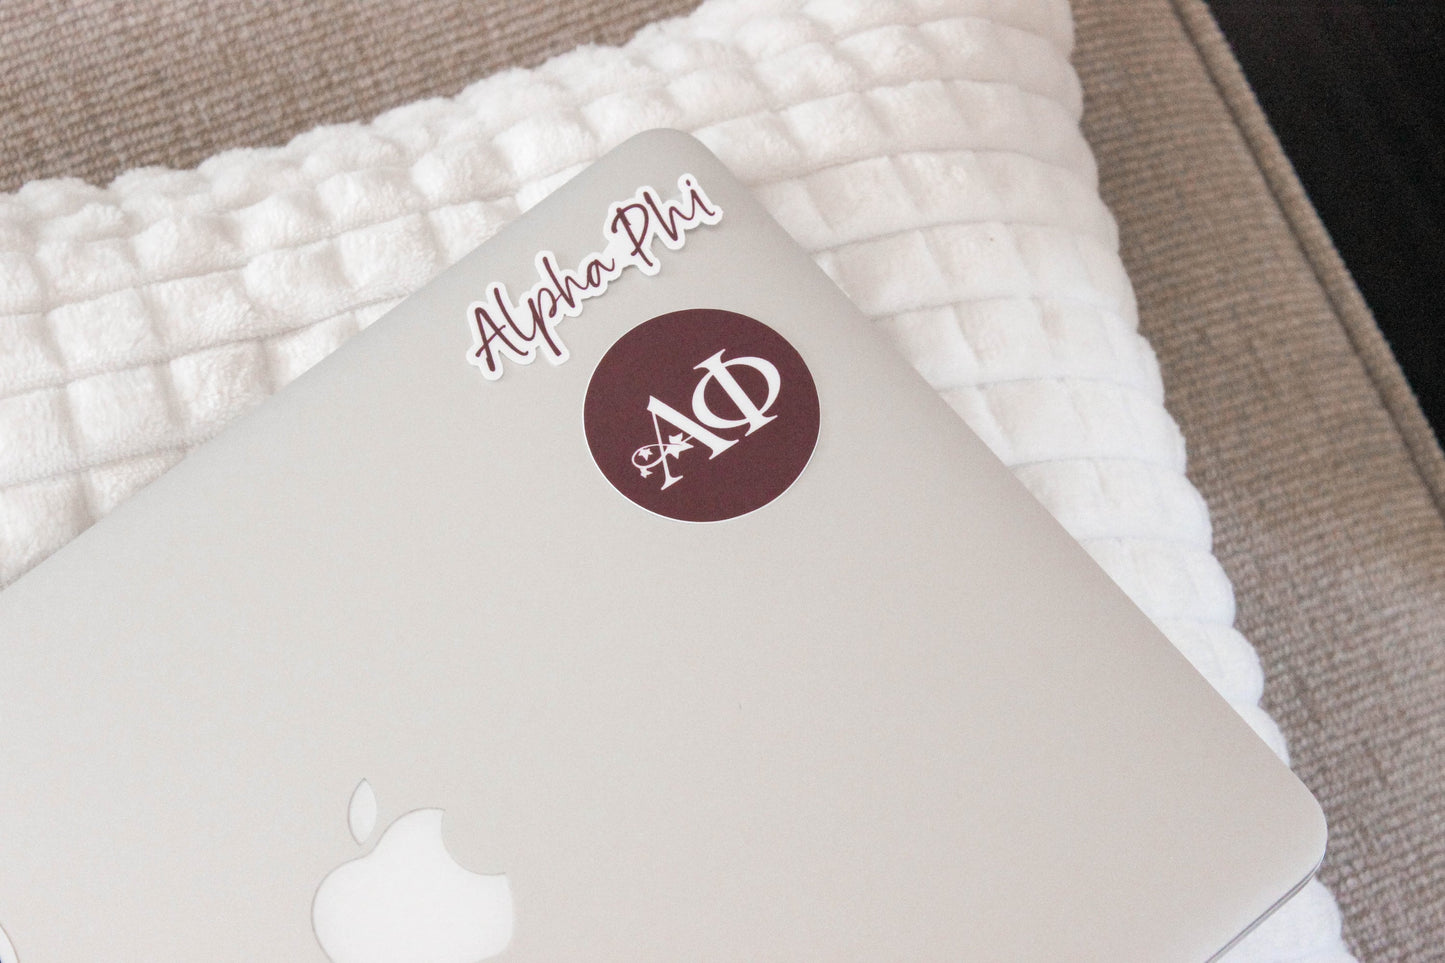 Alpha Phi Laptop Stickers - Pack of 2